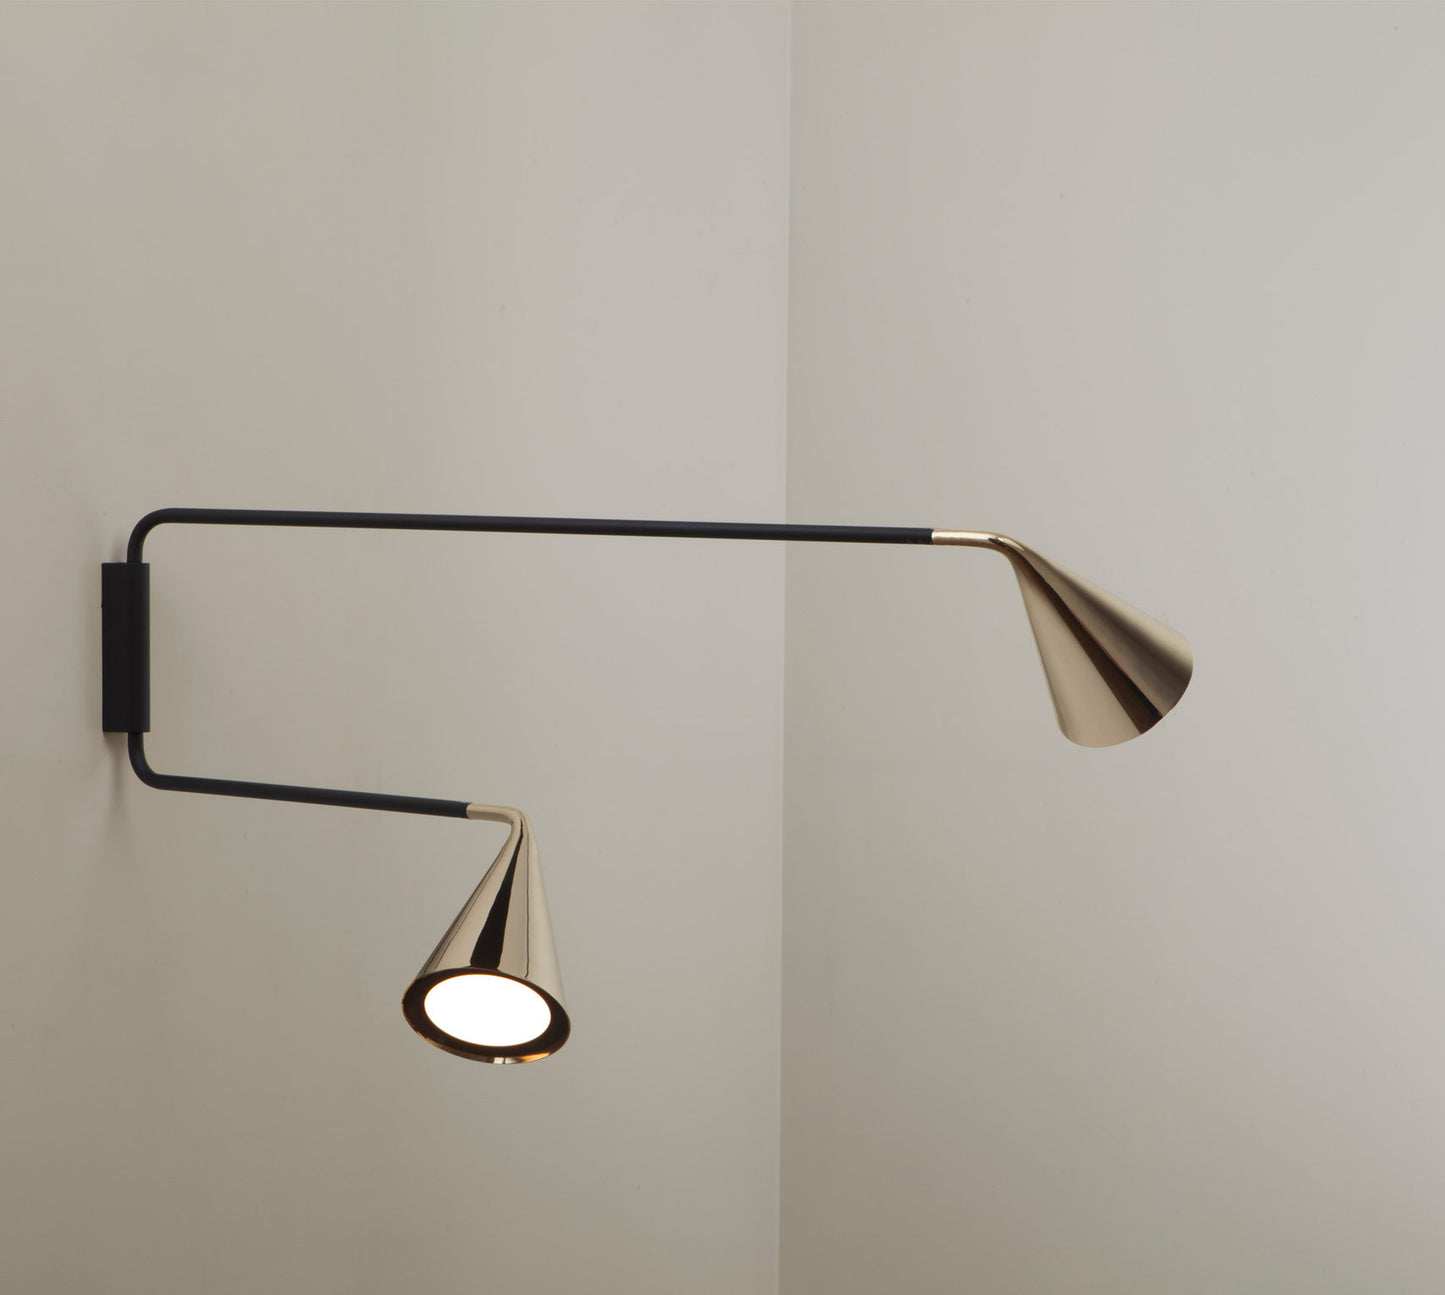 GORDON WALL LIGHT 561.48 BY TOOY from $1,780.00